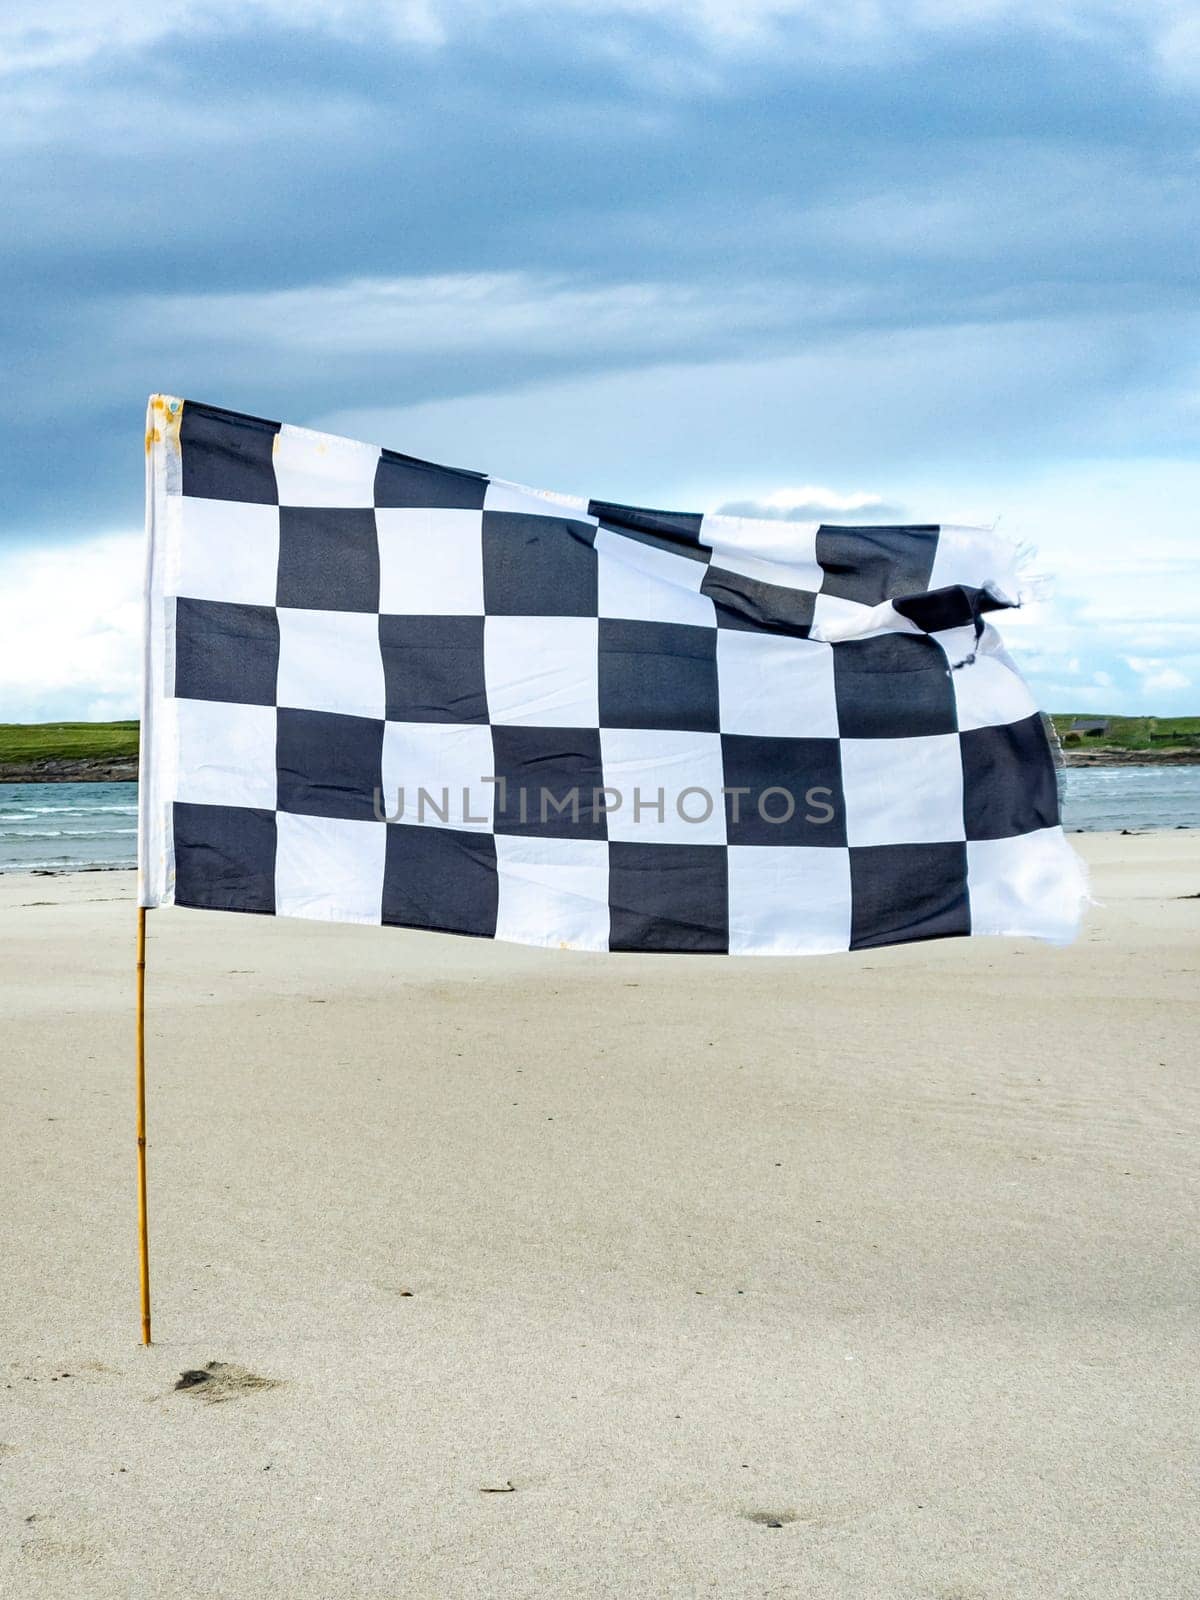 Black and white flag waving on the sandy beach.